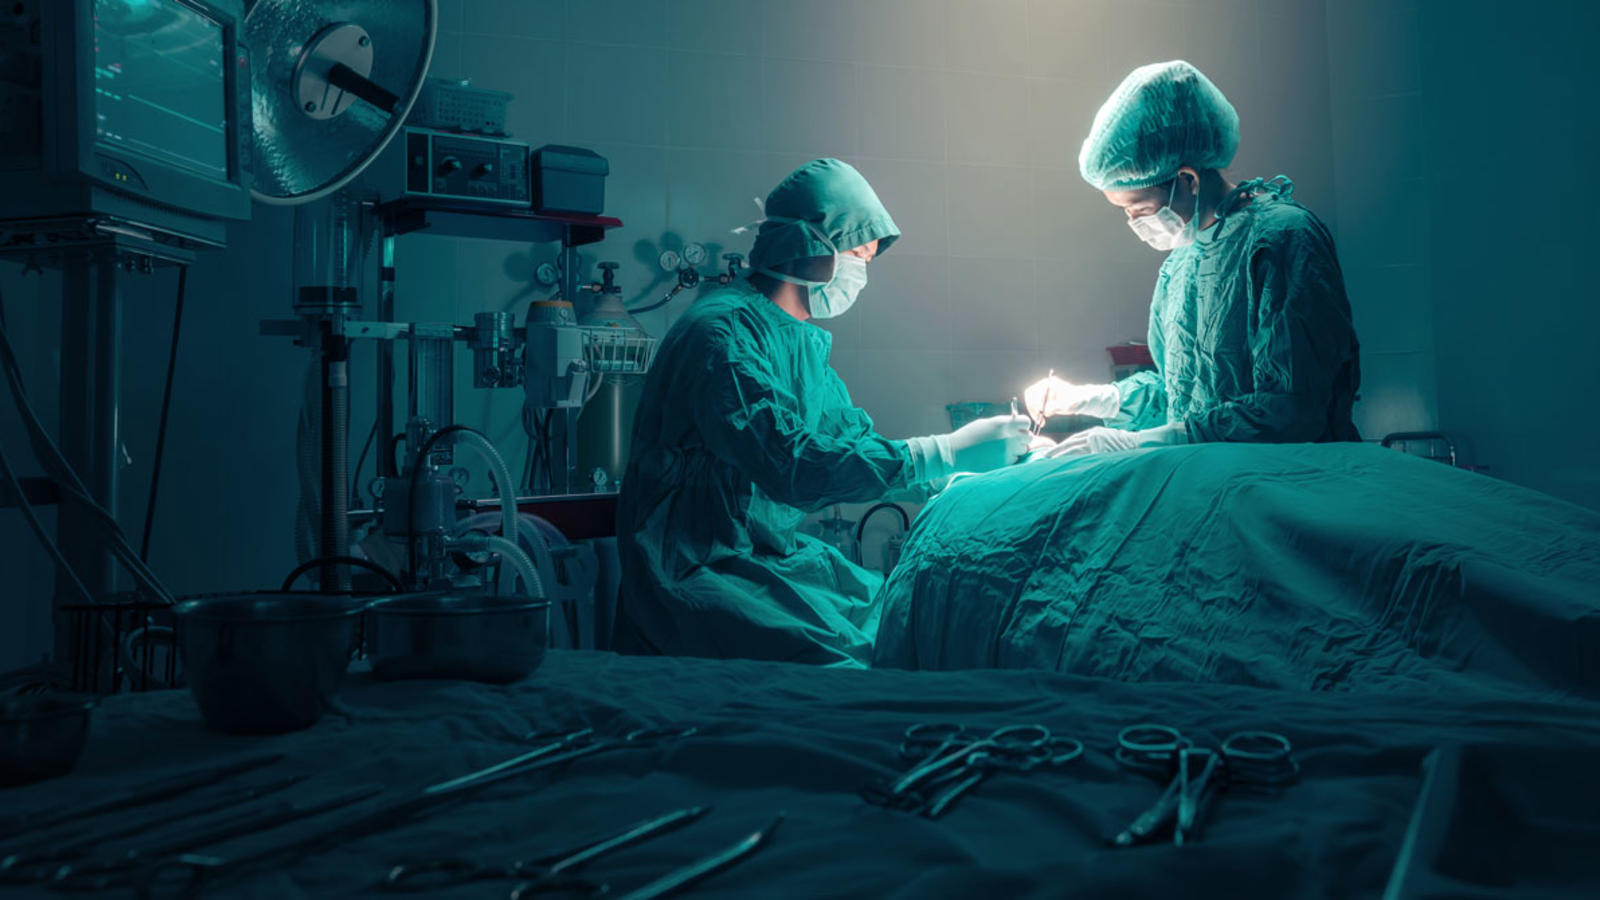 Doctors preforming surgery in a dimly lit operating room